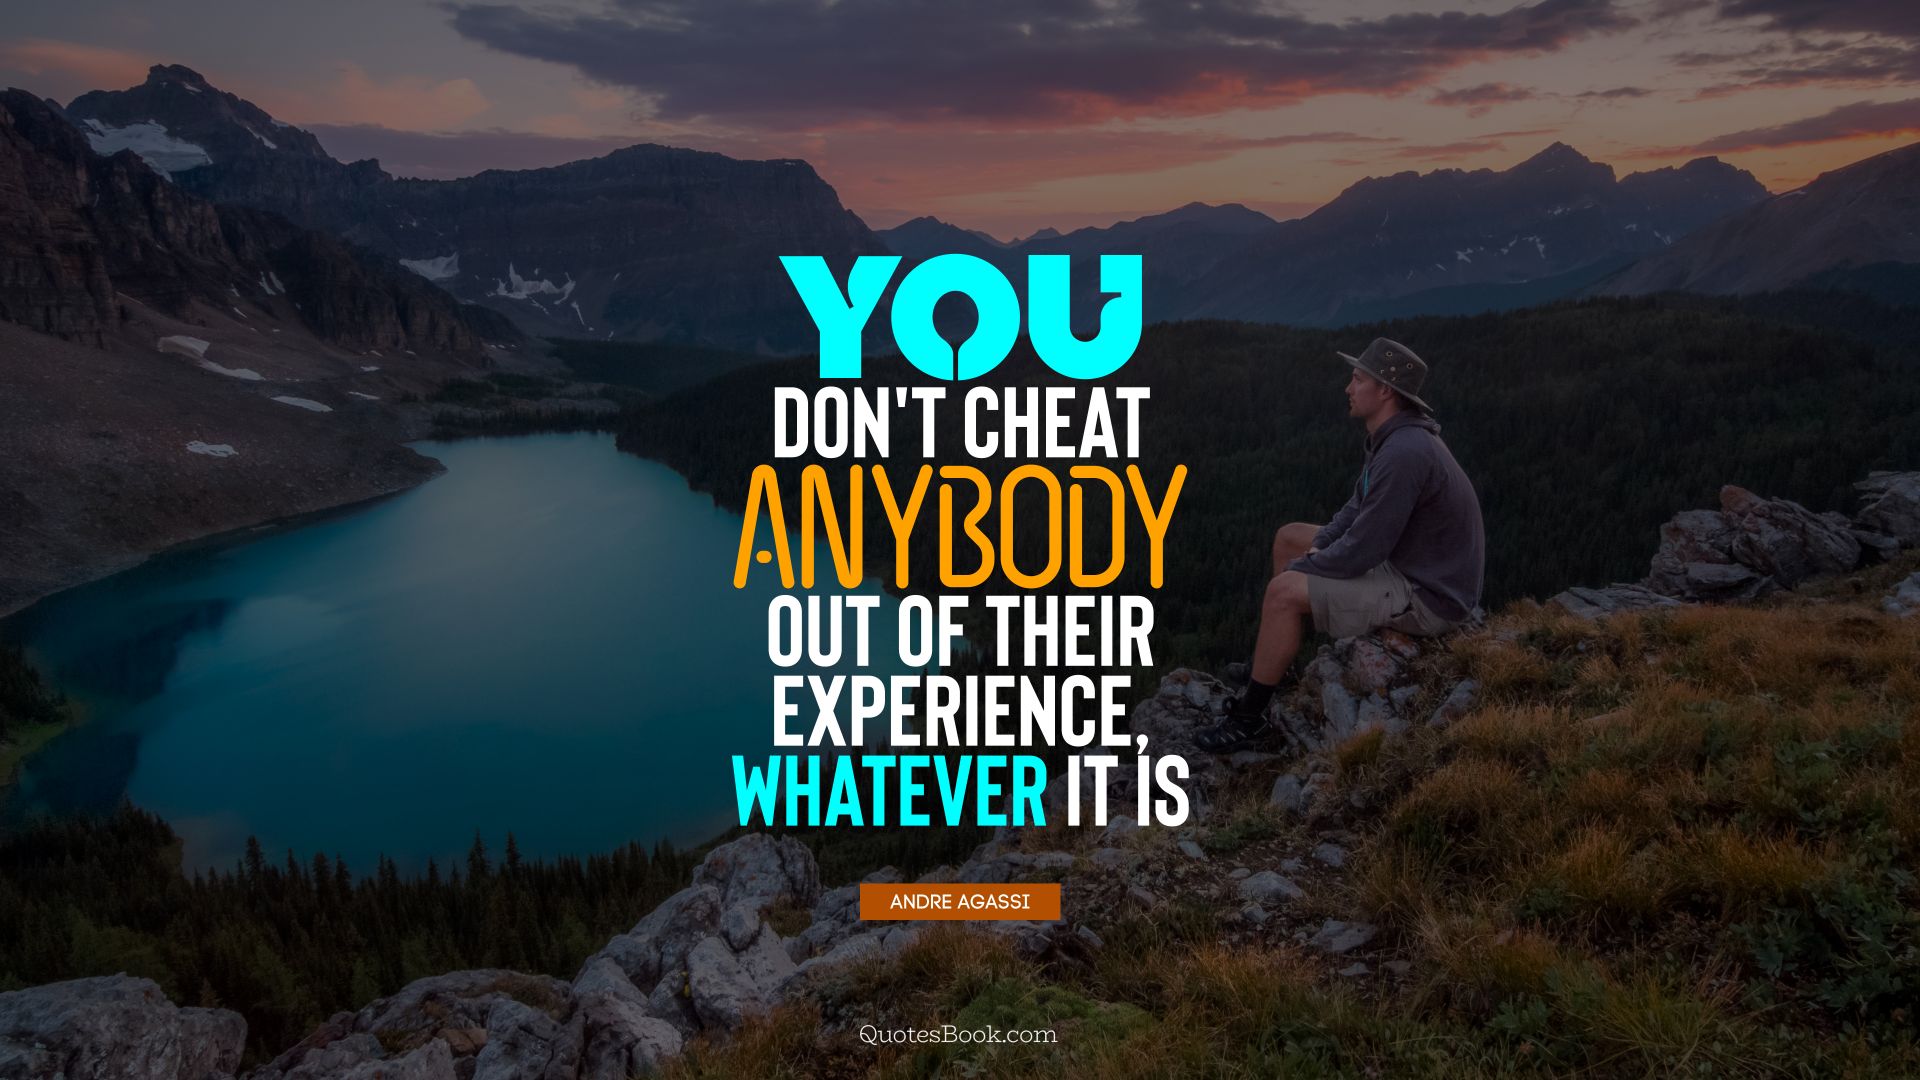 You don't cheat anybody out of their experience, whatever it is. - Quote by Andre Agassi